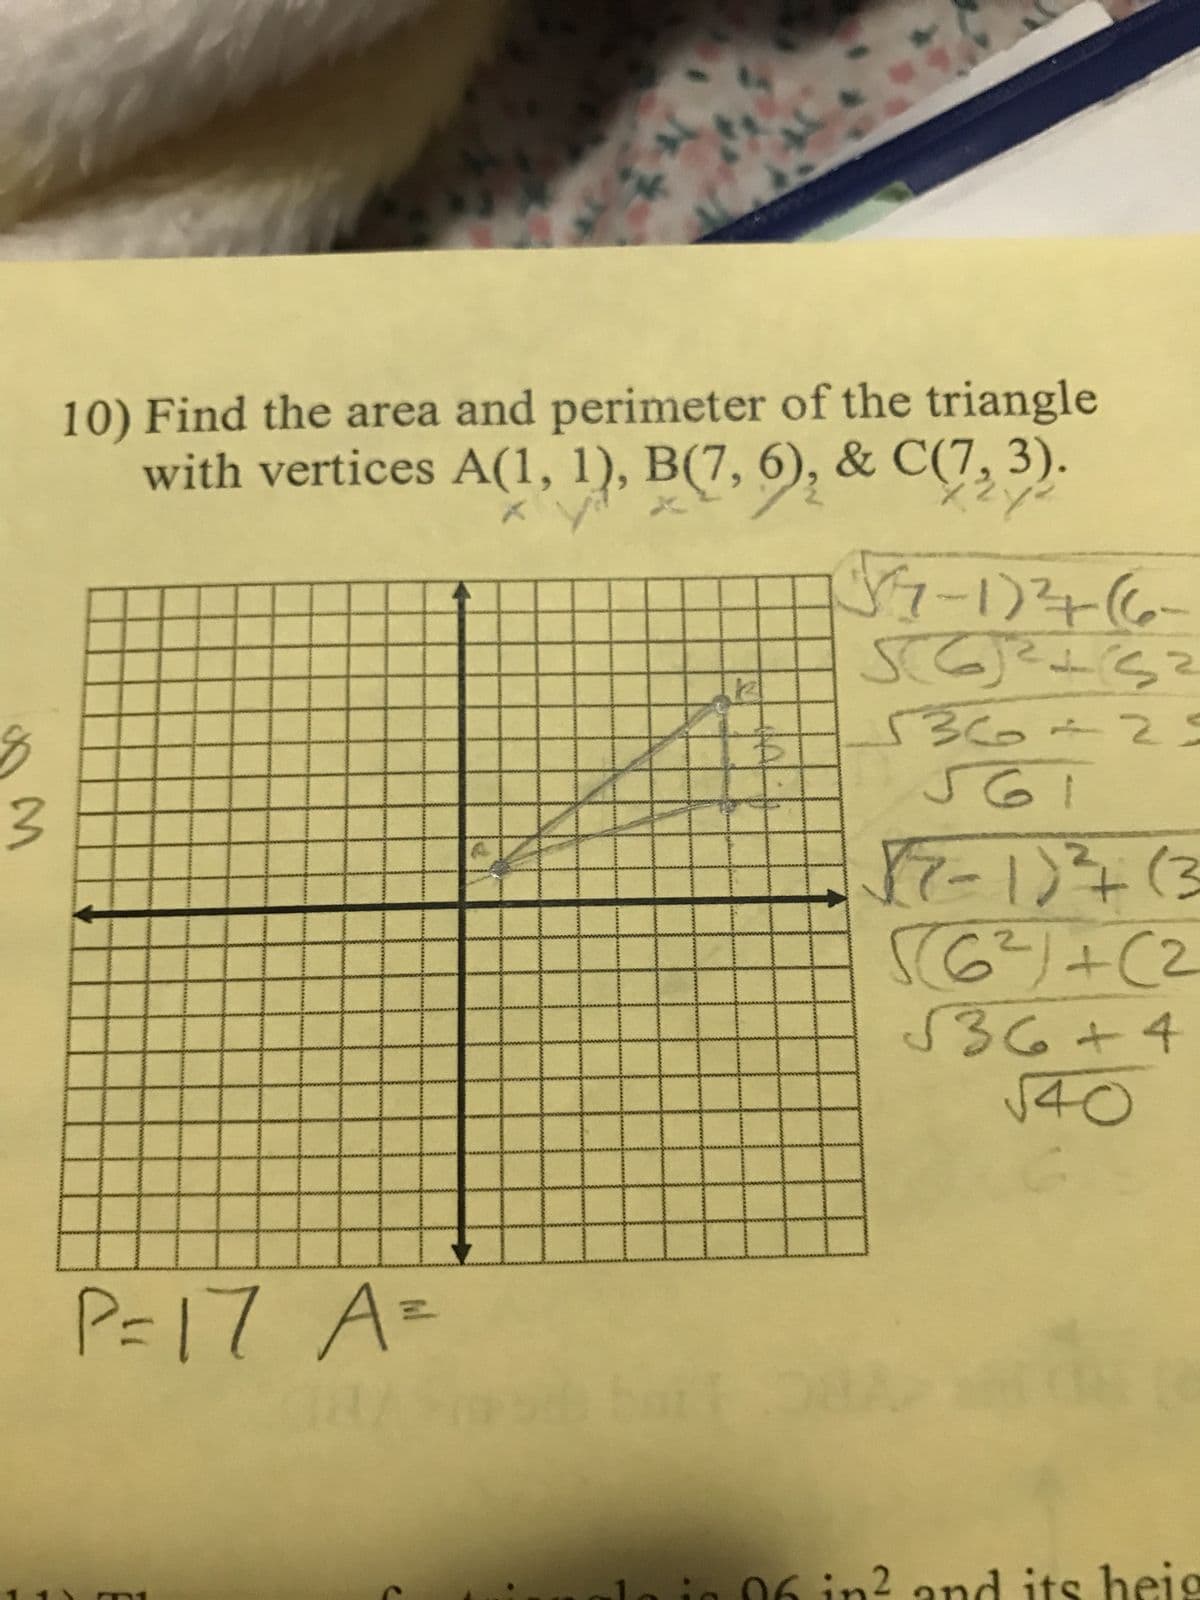 $
3
10) Find the area and perimeter of the triangle
with vertices A(1, 1), B(7, 6), & C(7,3).
P=17 A =
BI
12
2) +2₂ (1-45
SC)² +3²
536 +23
561
2) +₂ (1-2)
2)+(29))
√36+4
√40
n² and its heig